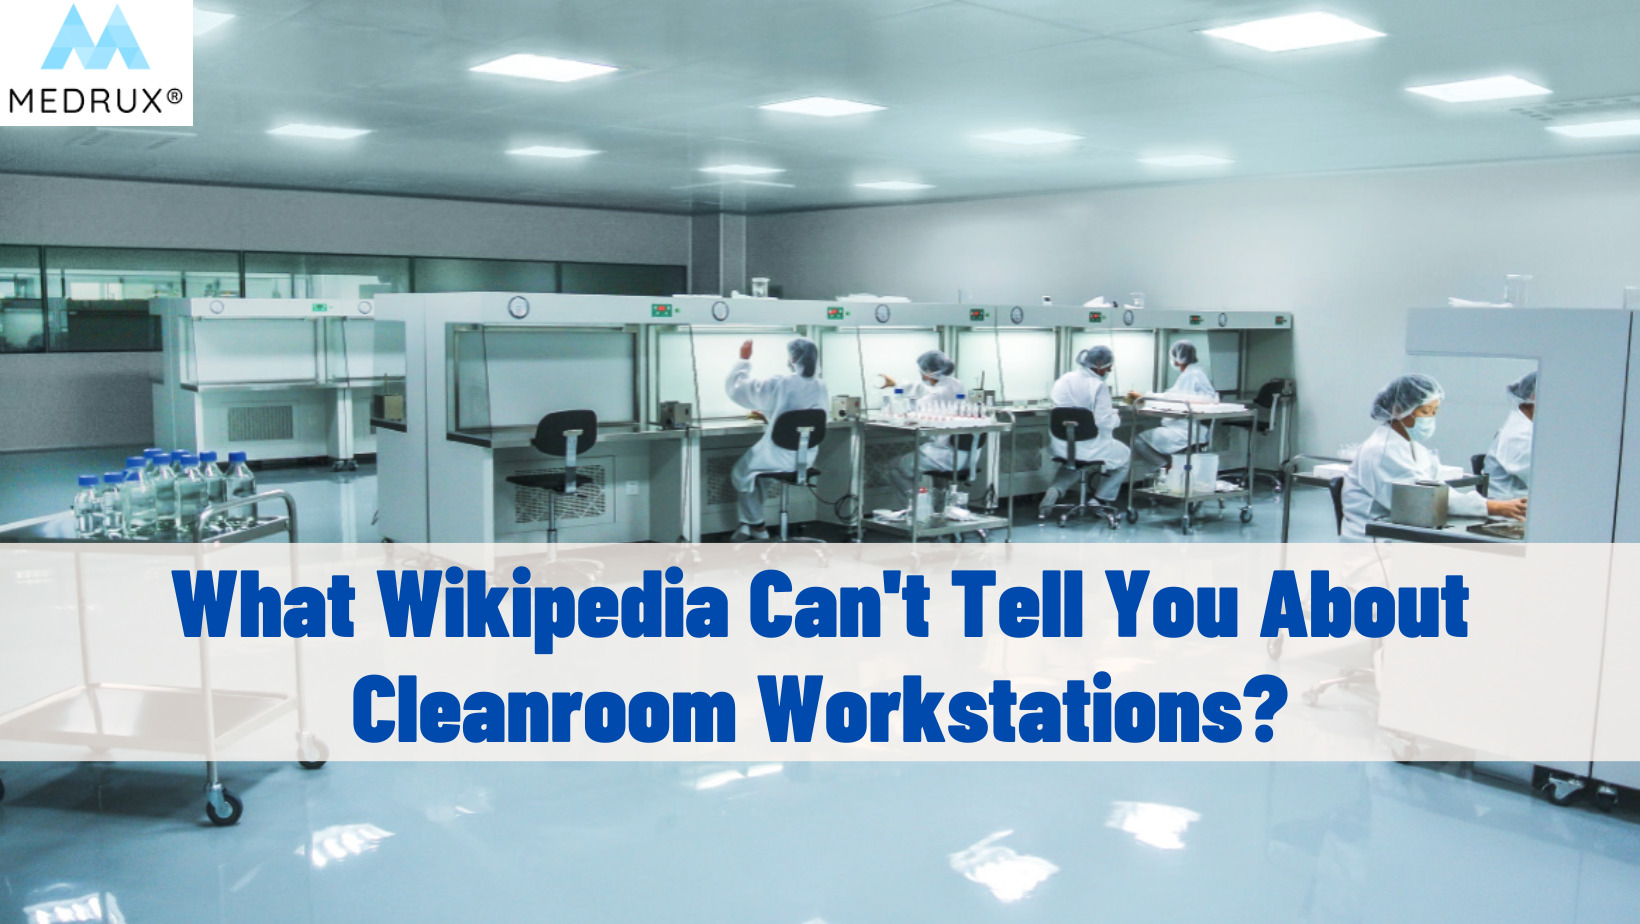 Cleanroom workstations